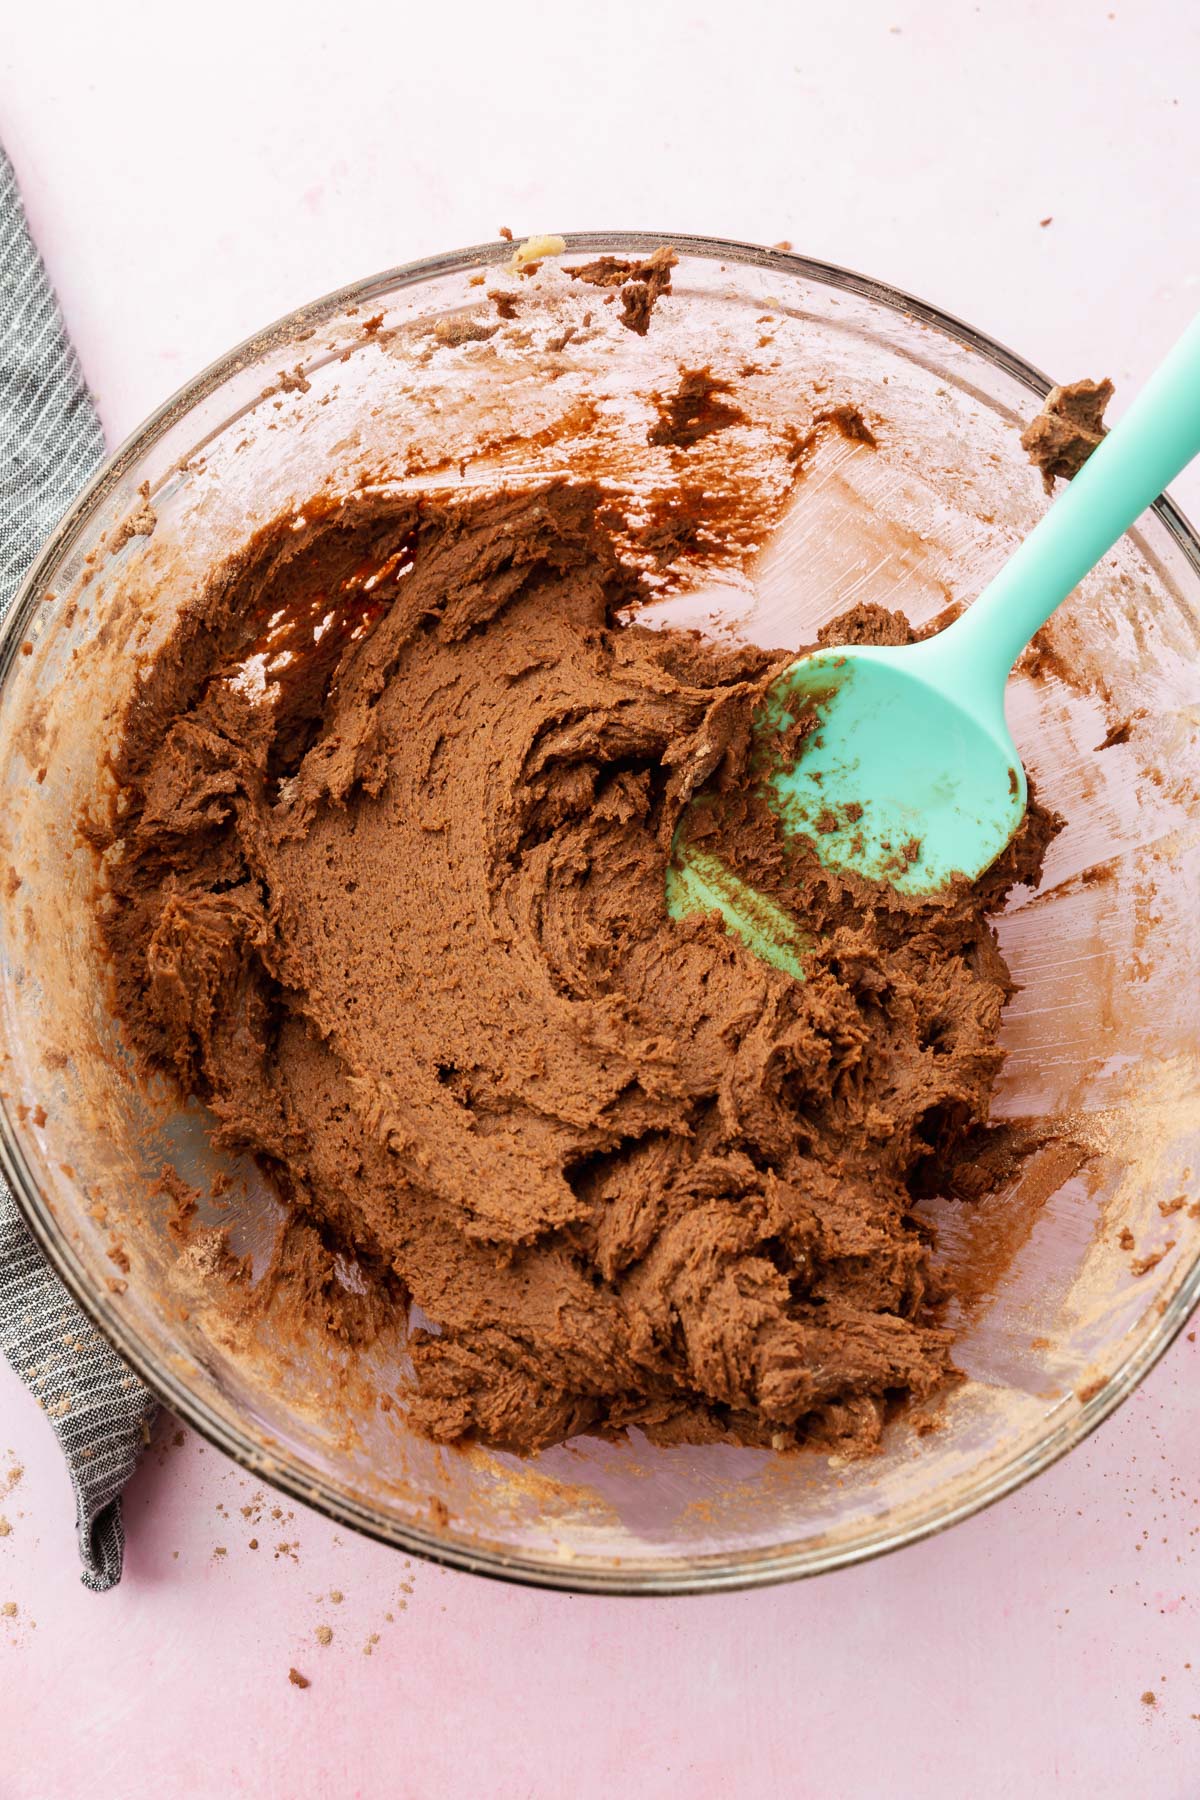 A gluten-free chocolate cookie dough in a glass mixing bowl with a blue spatula.